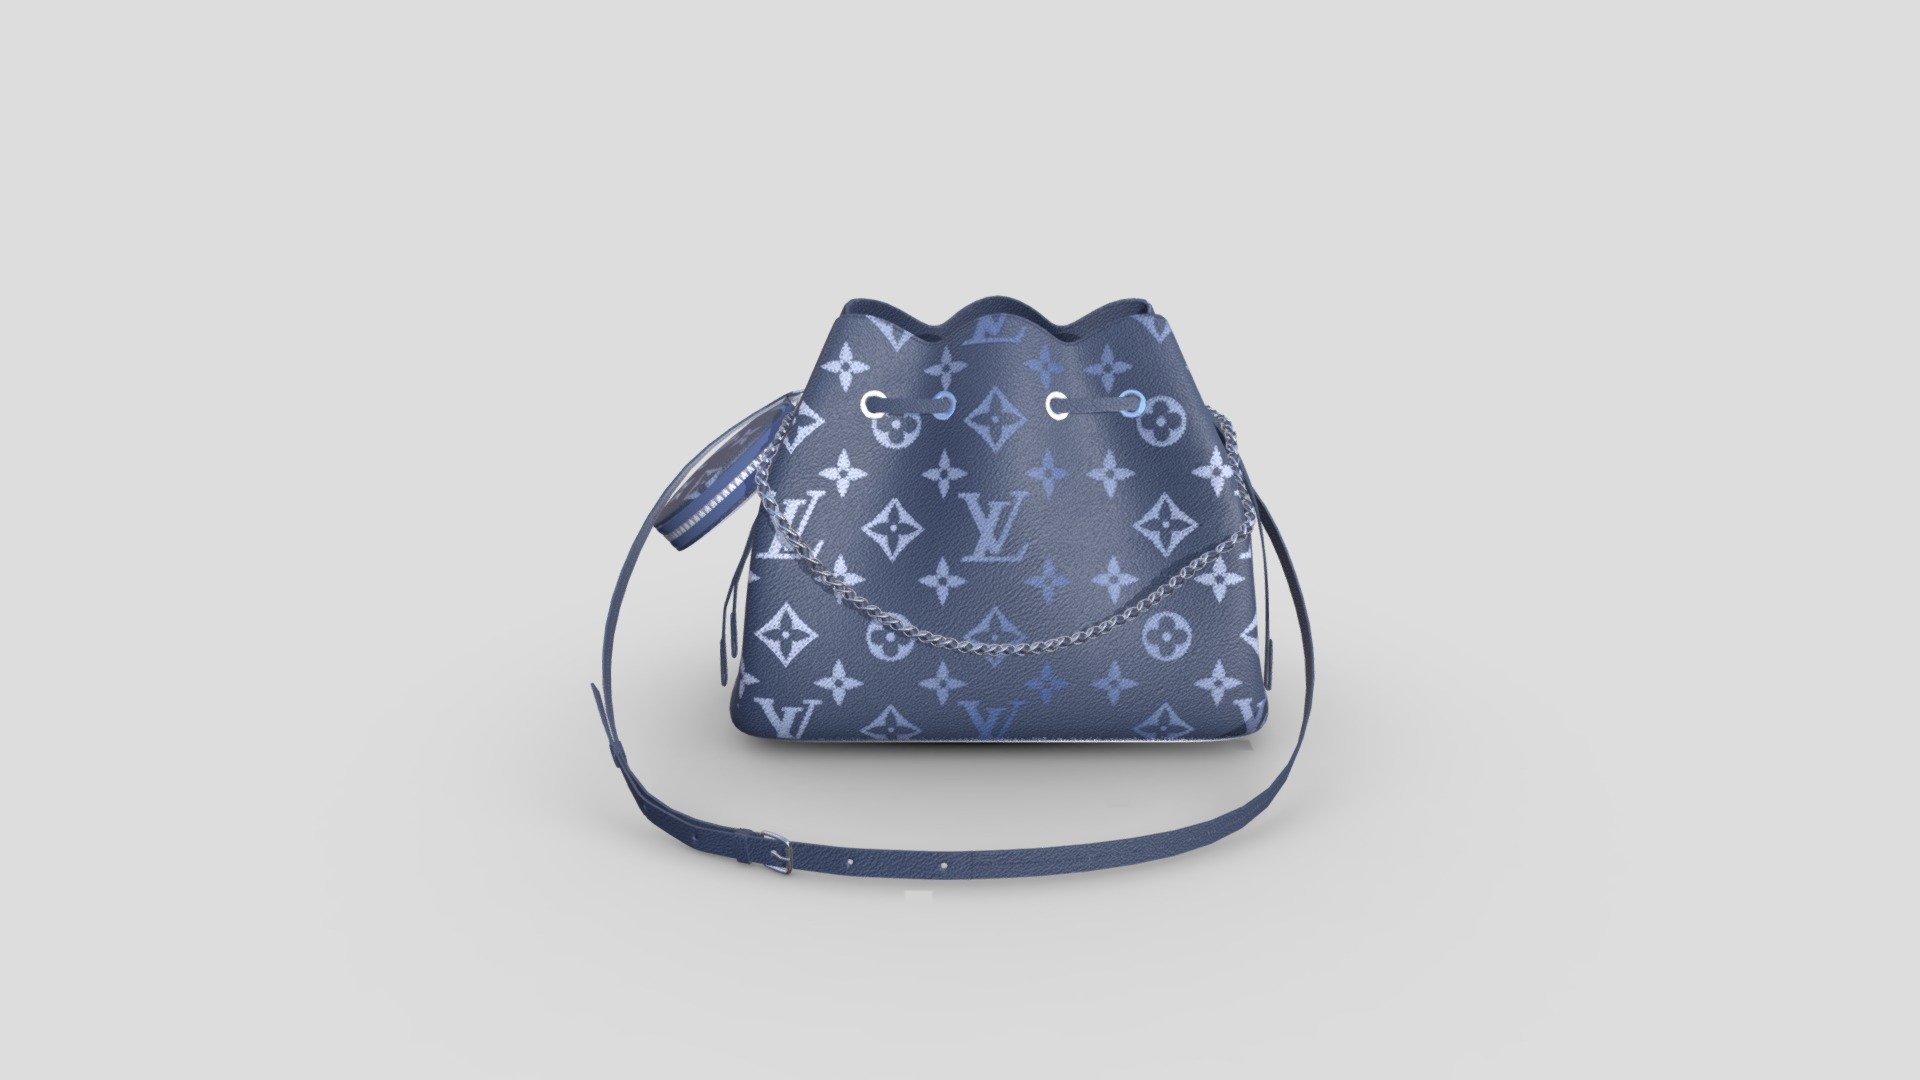 Check out this high quality low-poly 3D model of LV Bella bag.

For your 3D modelling requirements, or you want to buy this model connect with us at info@shinobu3d.com.

We offer premium quality low poly 3D assets/models for AR/VR applications, 3D visualisations, 3D product configurators, 3D printing &amp; 3D animations.

Visit https://www.shinobu3d.com for more on us 3d model